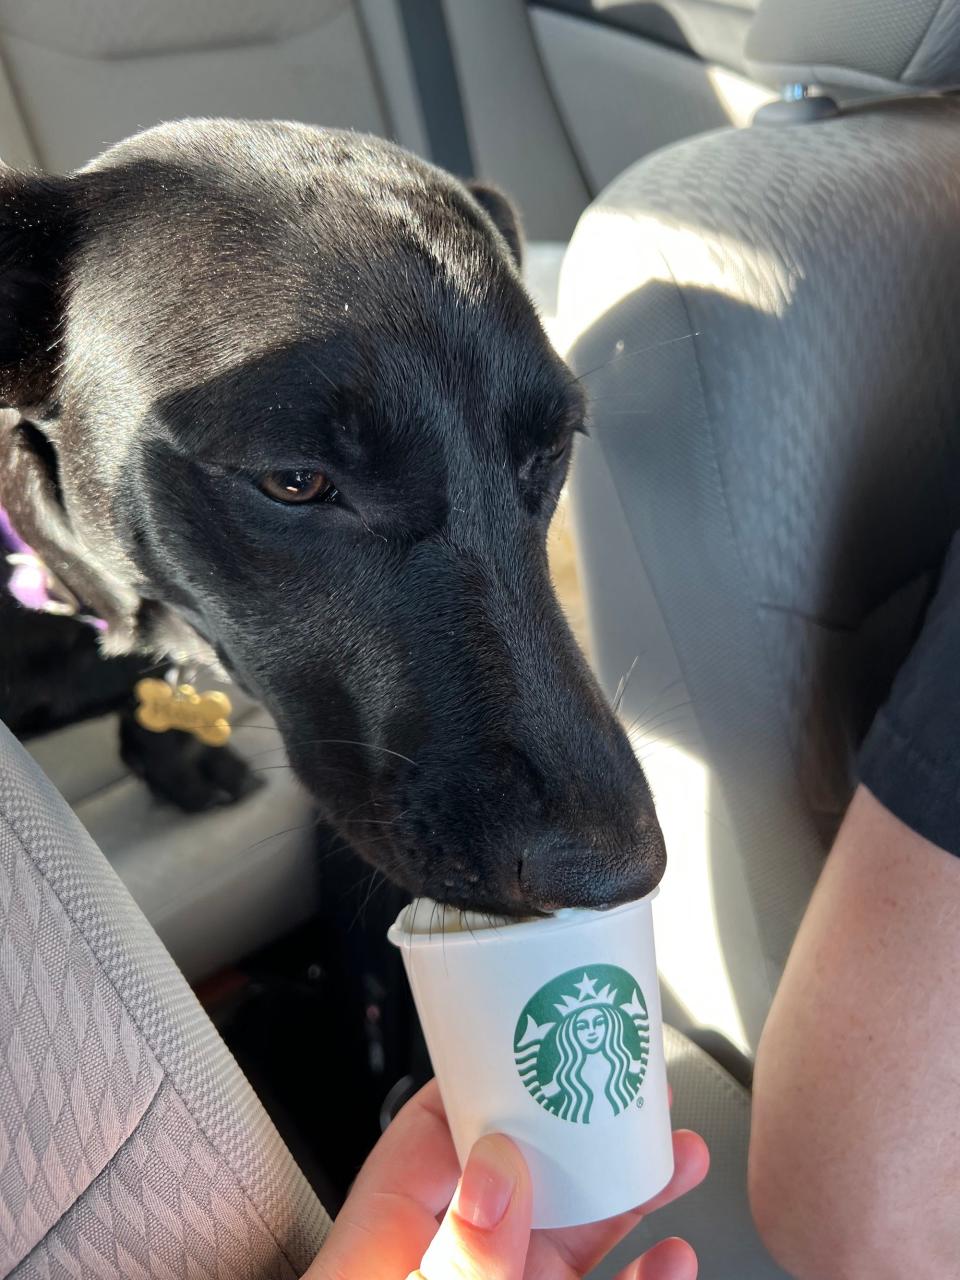 A dog eats a pup cup in a car.